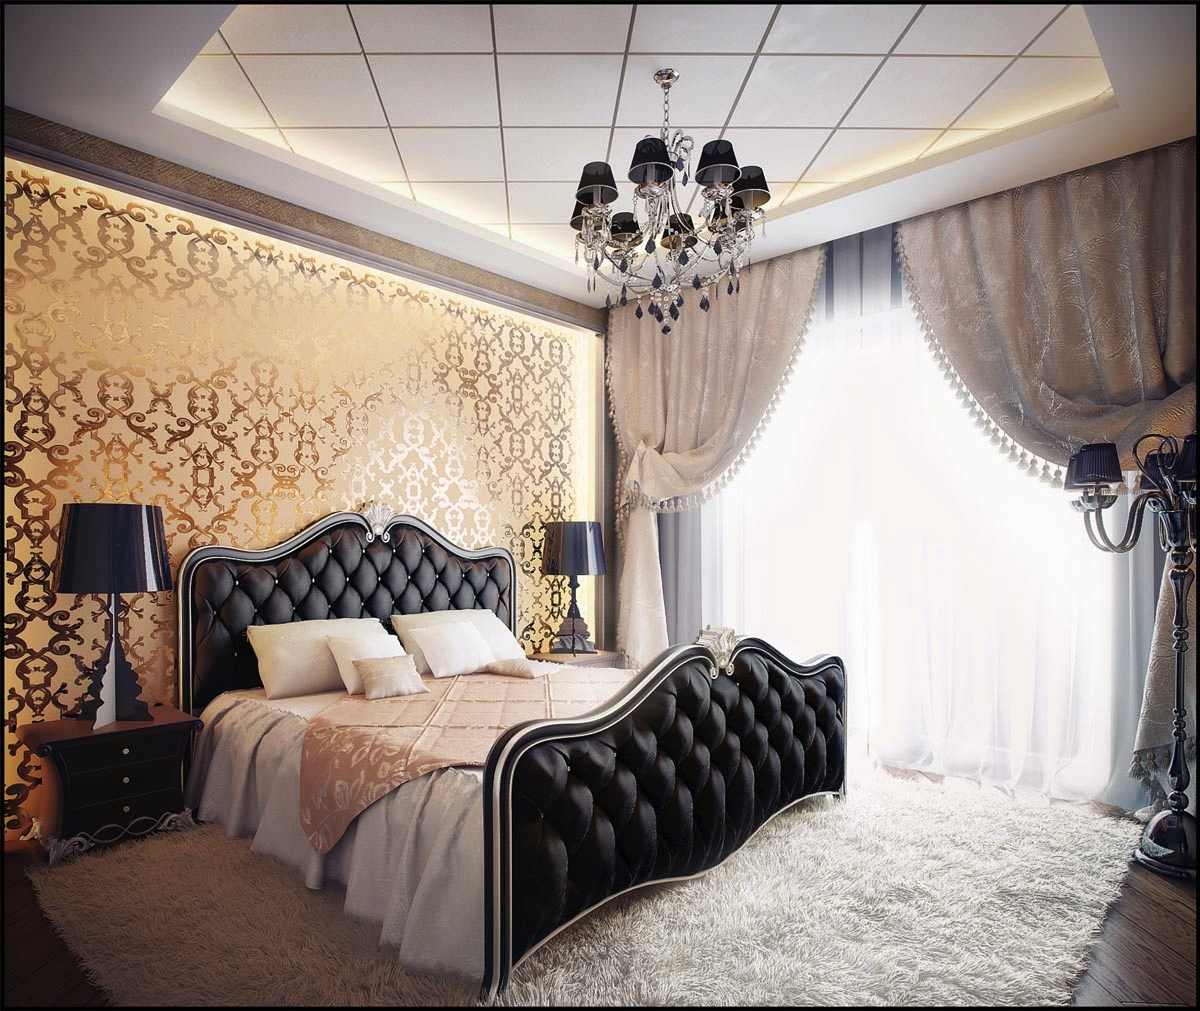 awesome Bedrooms ideas pictures 2014 Decorating Bedrooms 2014 ~ Room ...